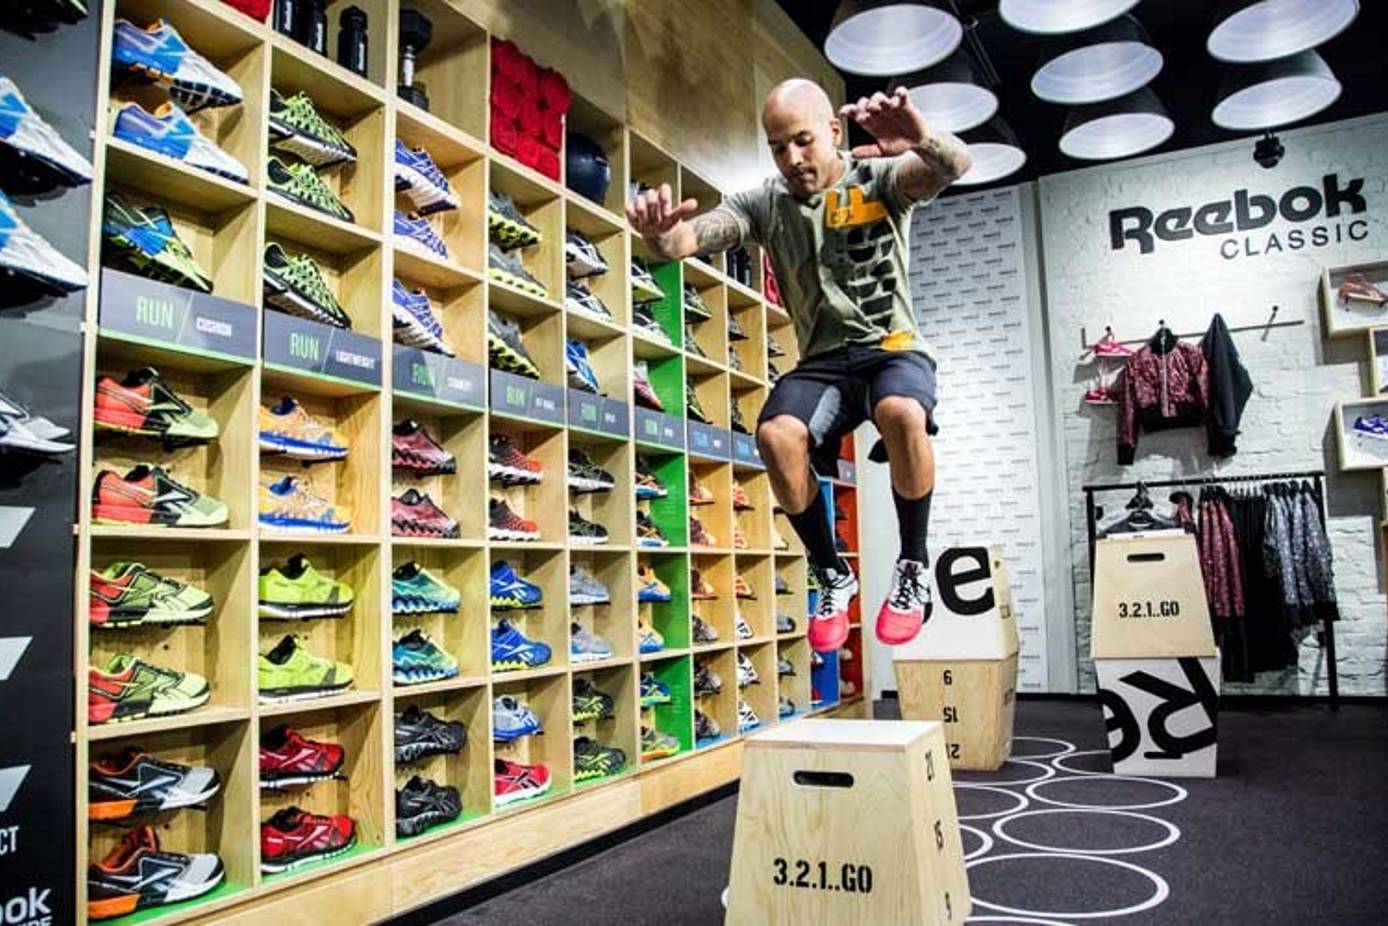 Reebok to open stores in China by 2020